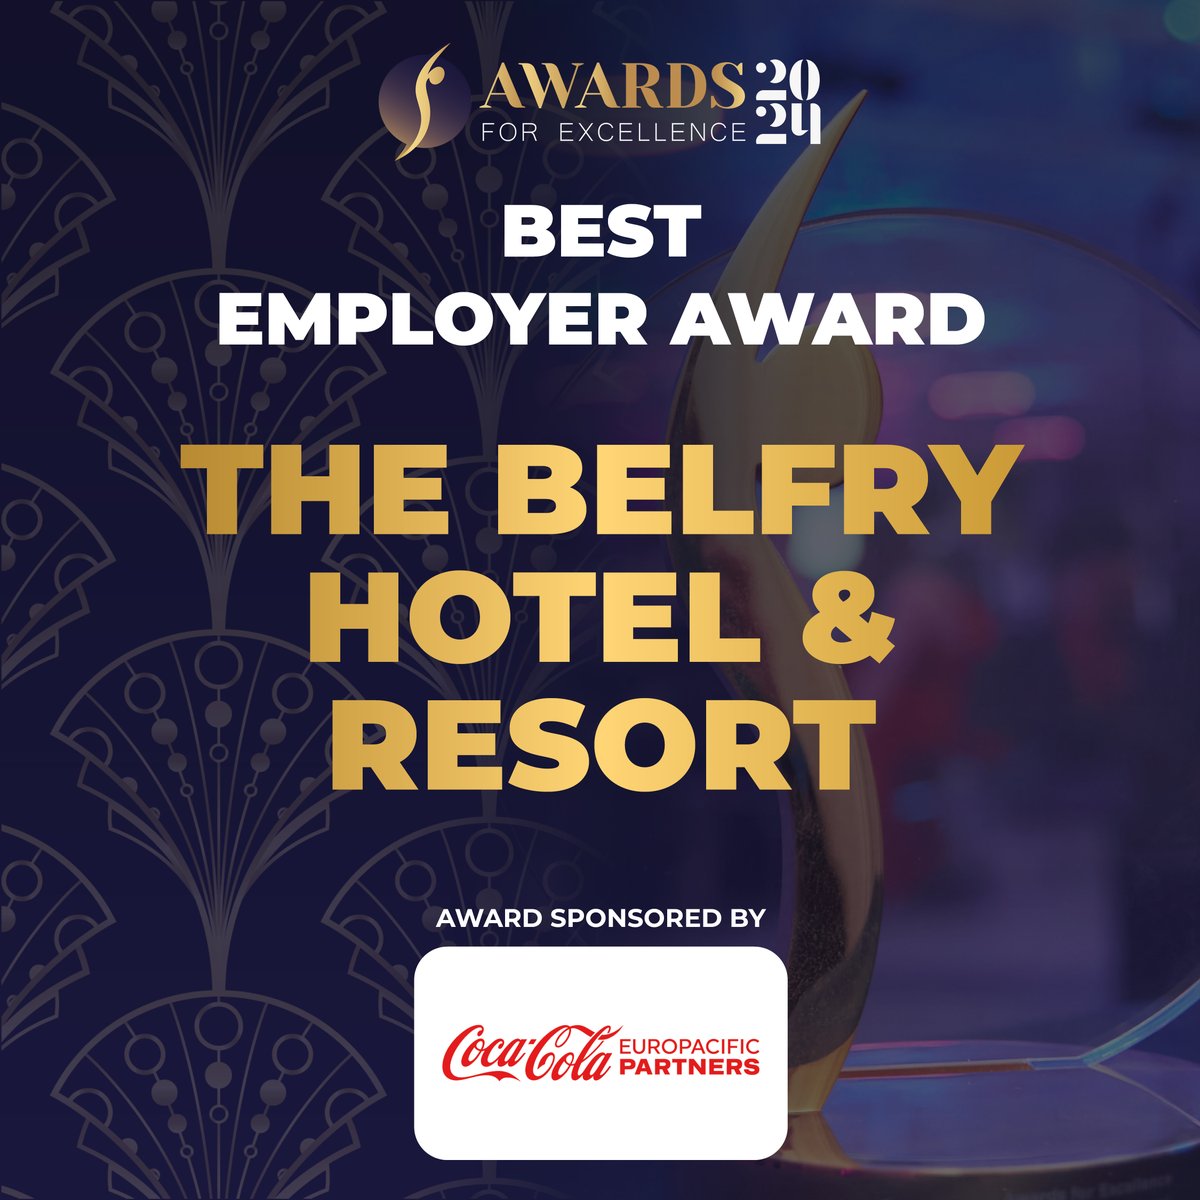 ✨ BEST EMPLOYER AWARD ✨ And the winner is… @TheBelfryHotel! 🏆 A huge congratulations to The Belfry Hotel & Resort, and thank you to @CocaColaEP for sponsoring this Award 👏 #SpringboardAwards #Springboard #Hospitality